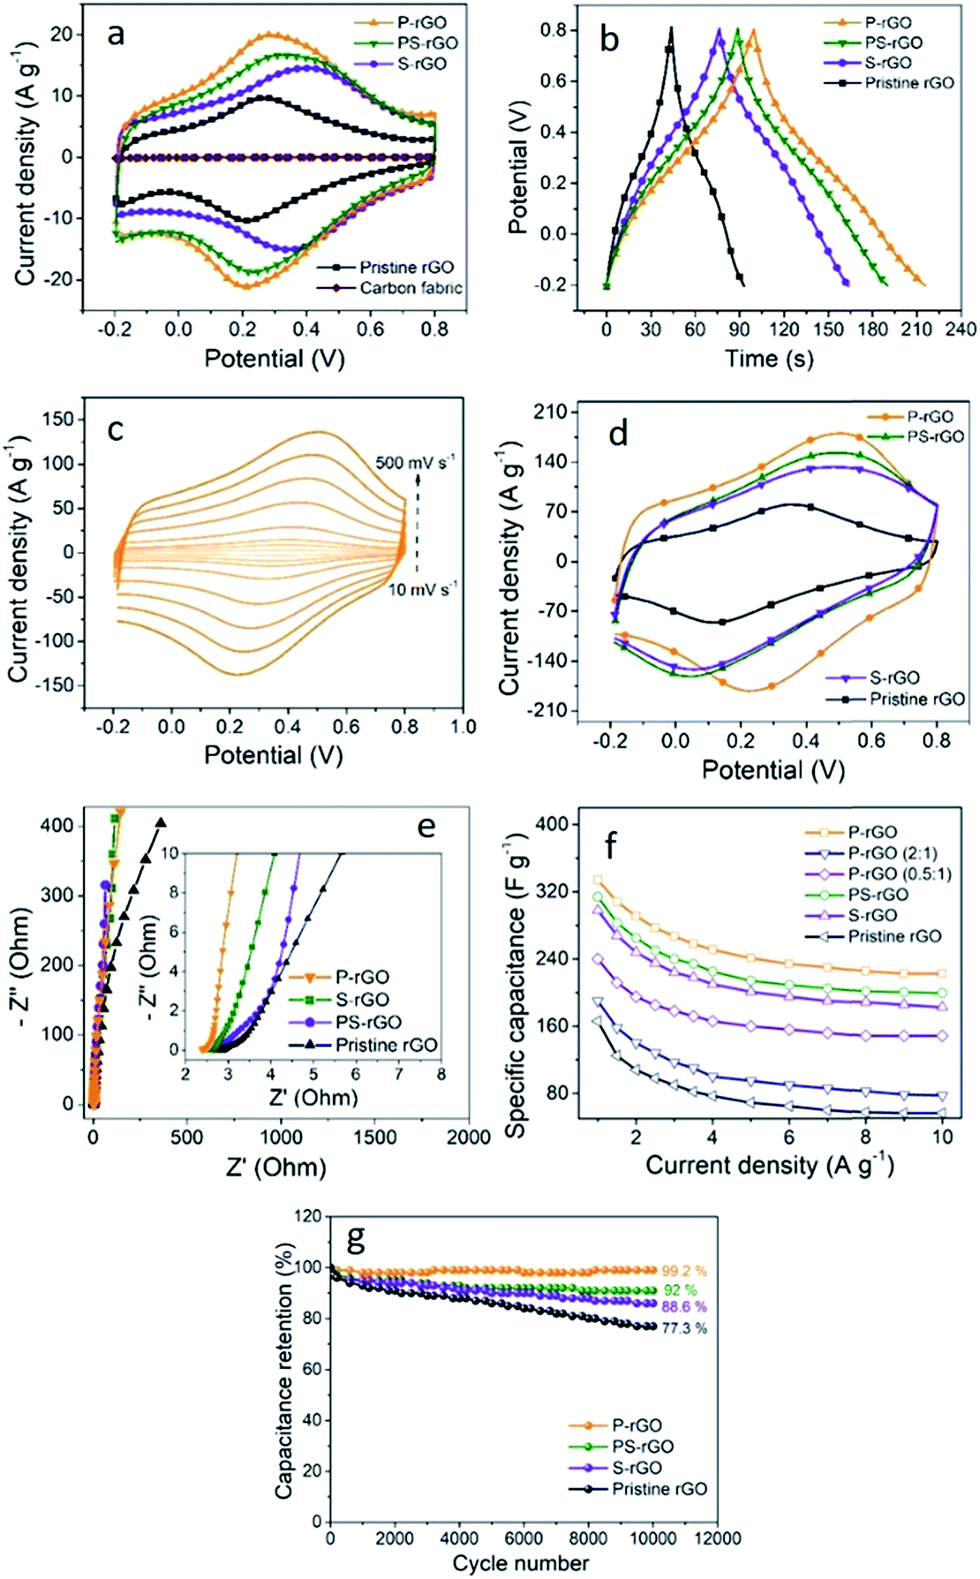 A General Potentiodynamic Approach For Red Phosphorus And Sulfur Nanodot Incorporation On Reduced Graphene Oxide Sheets Metal Free And Binder Free Electrodes For Supercapacitor And Hydrogen Evolution Activities Journal Of Materials Chemistry A